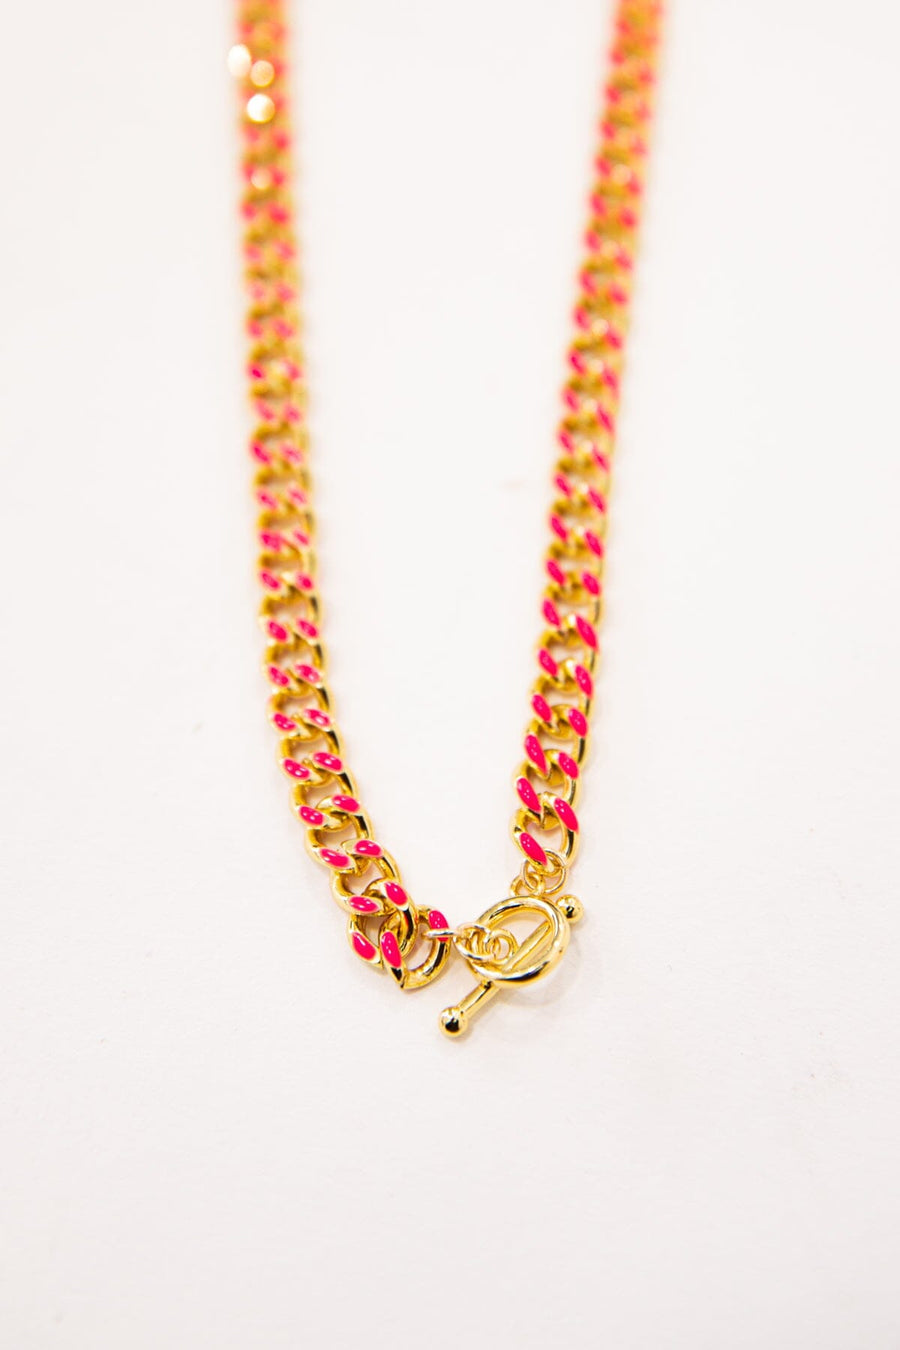 Hot Pink and Gold Enamel Thick Chain Necklace - Filly Flair